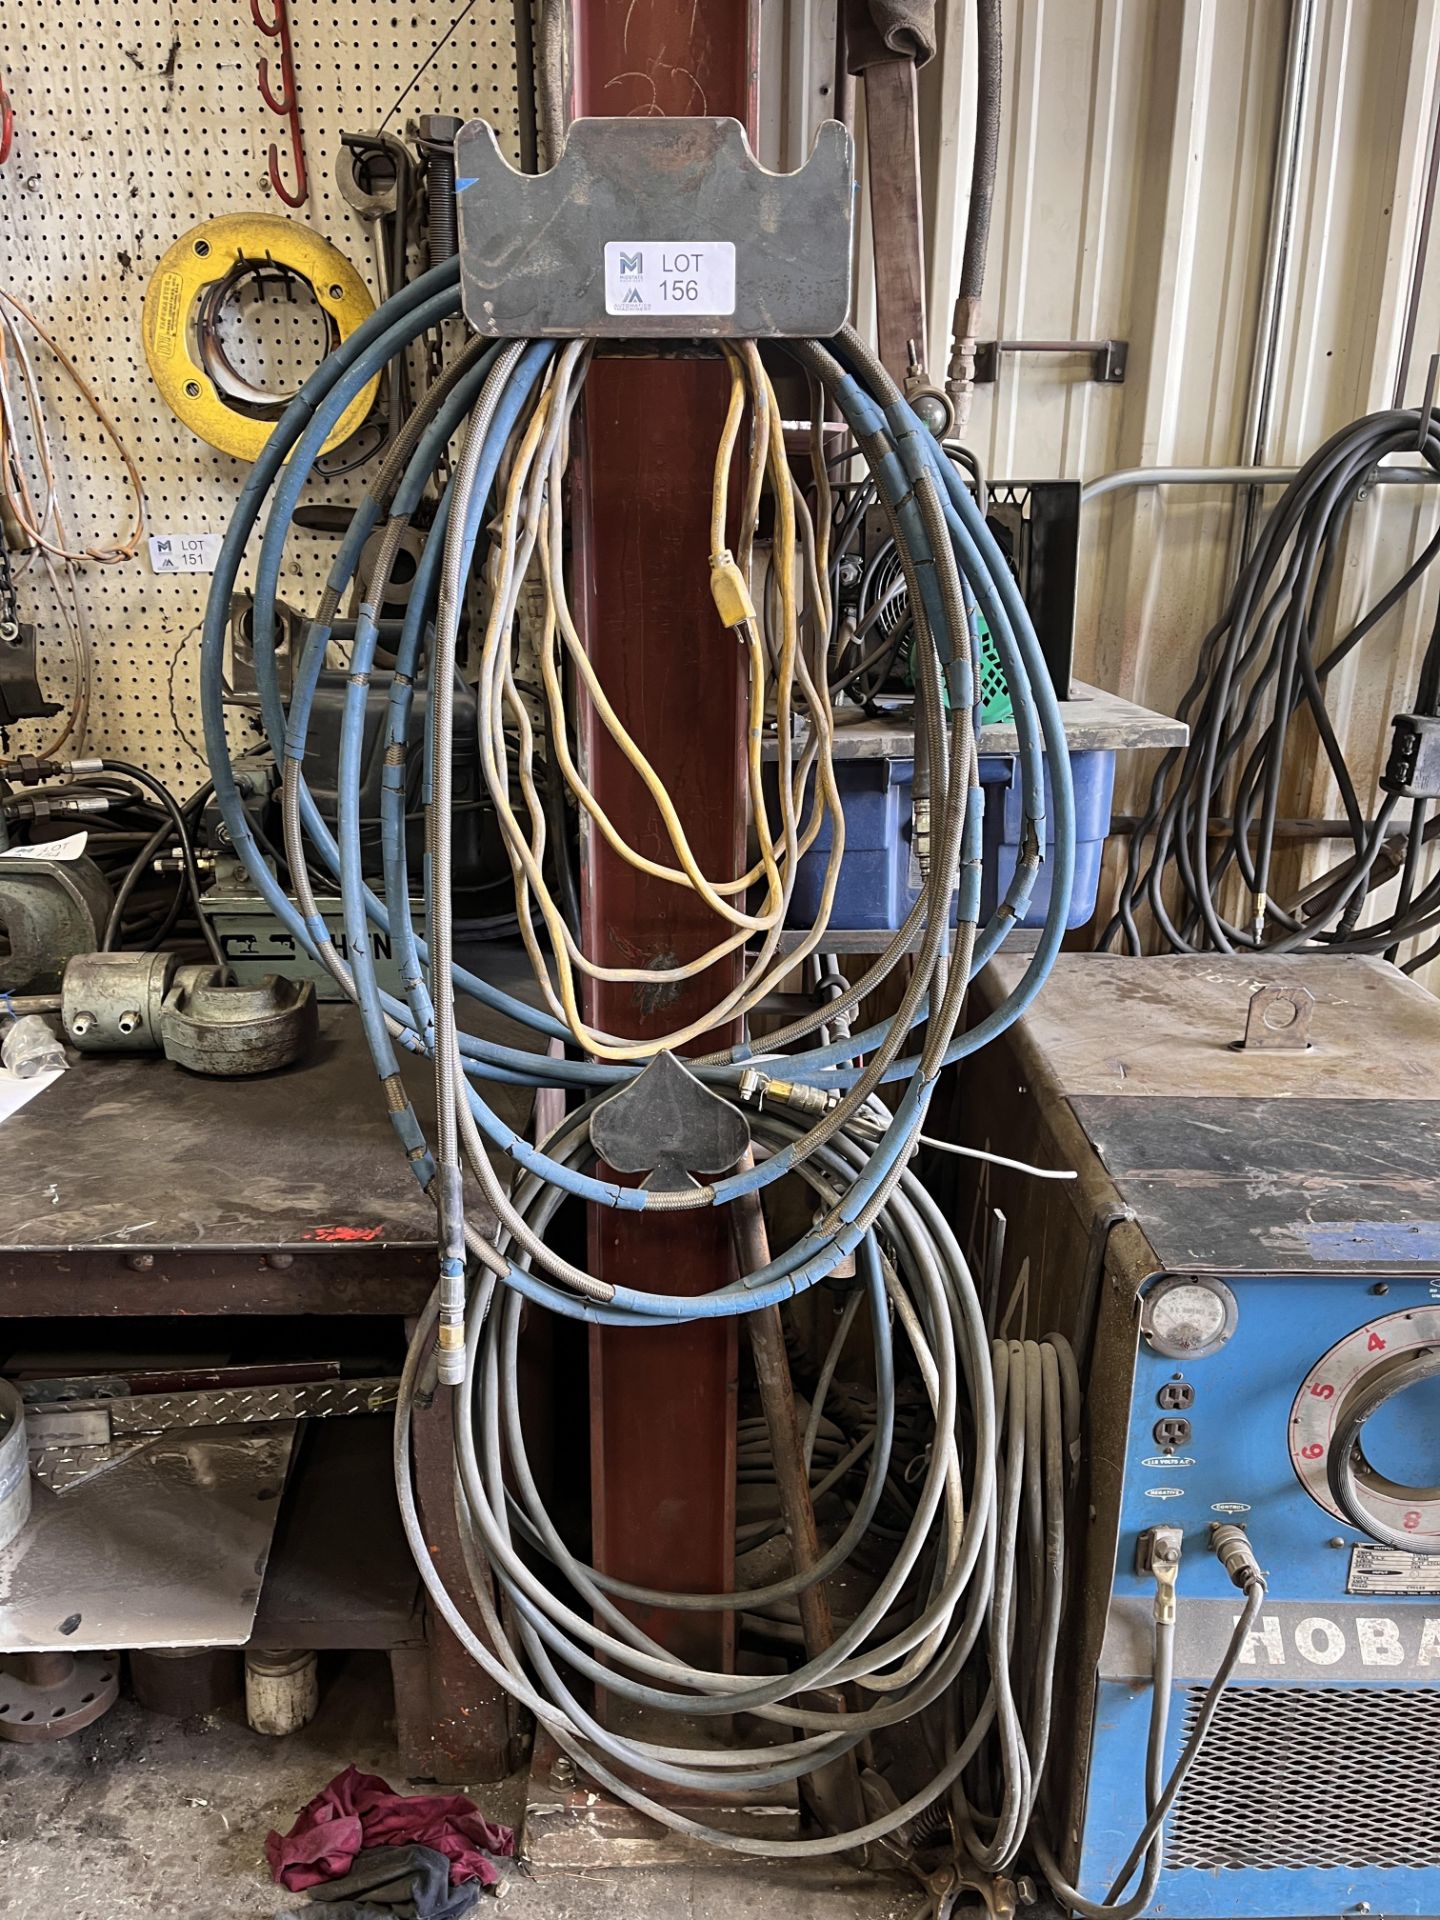 Hobart RG-600 Welder With Yellow arm and Millermatic Wire Feed - Image 6 of 10